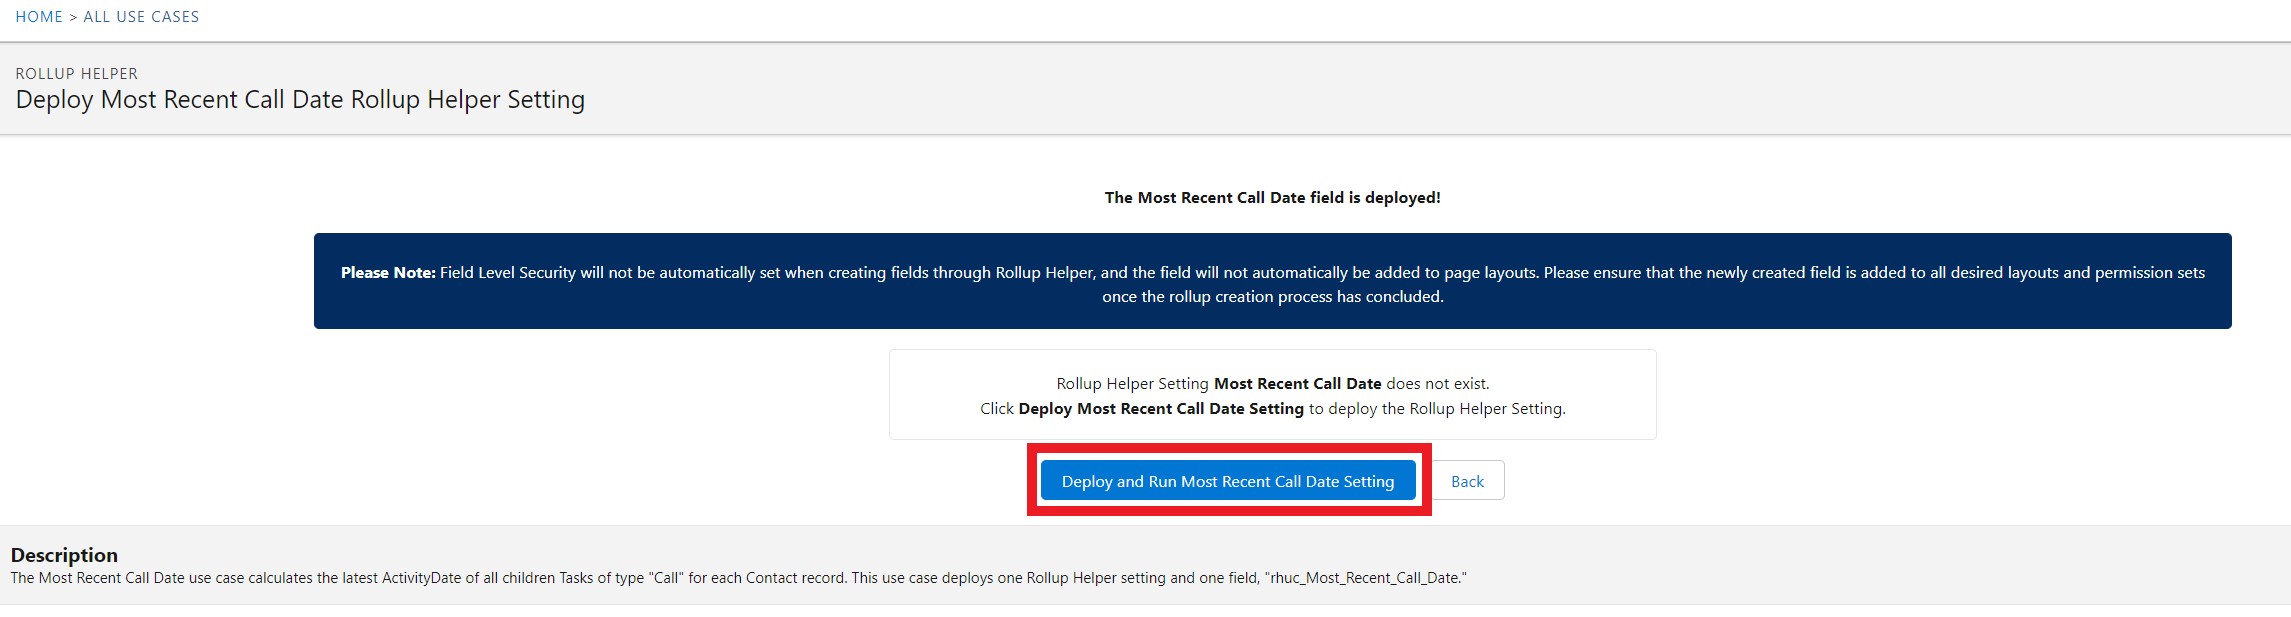 Most Recent Call Date deploy setting